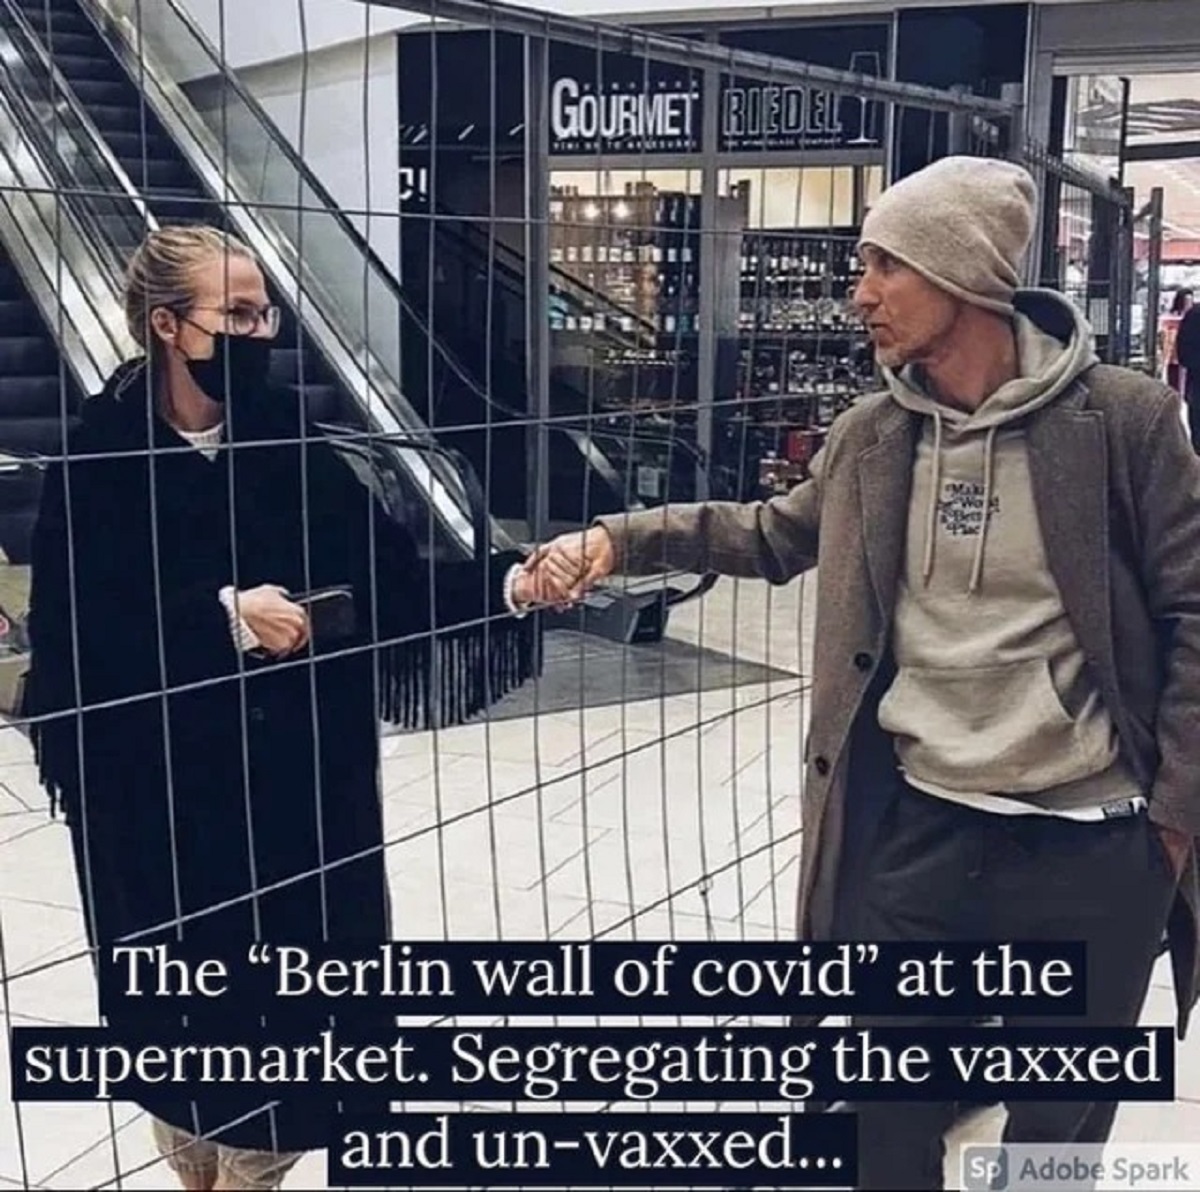 cringe pics - cool - C! Gourmet Biedel Virene Maki Wa The "Berlin wall of covid" at the supermarket. Segregating the vaxxed and unvaxxed... Sp Adobe Spark